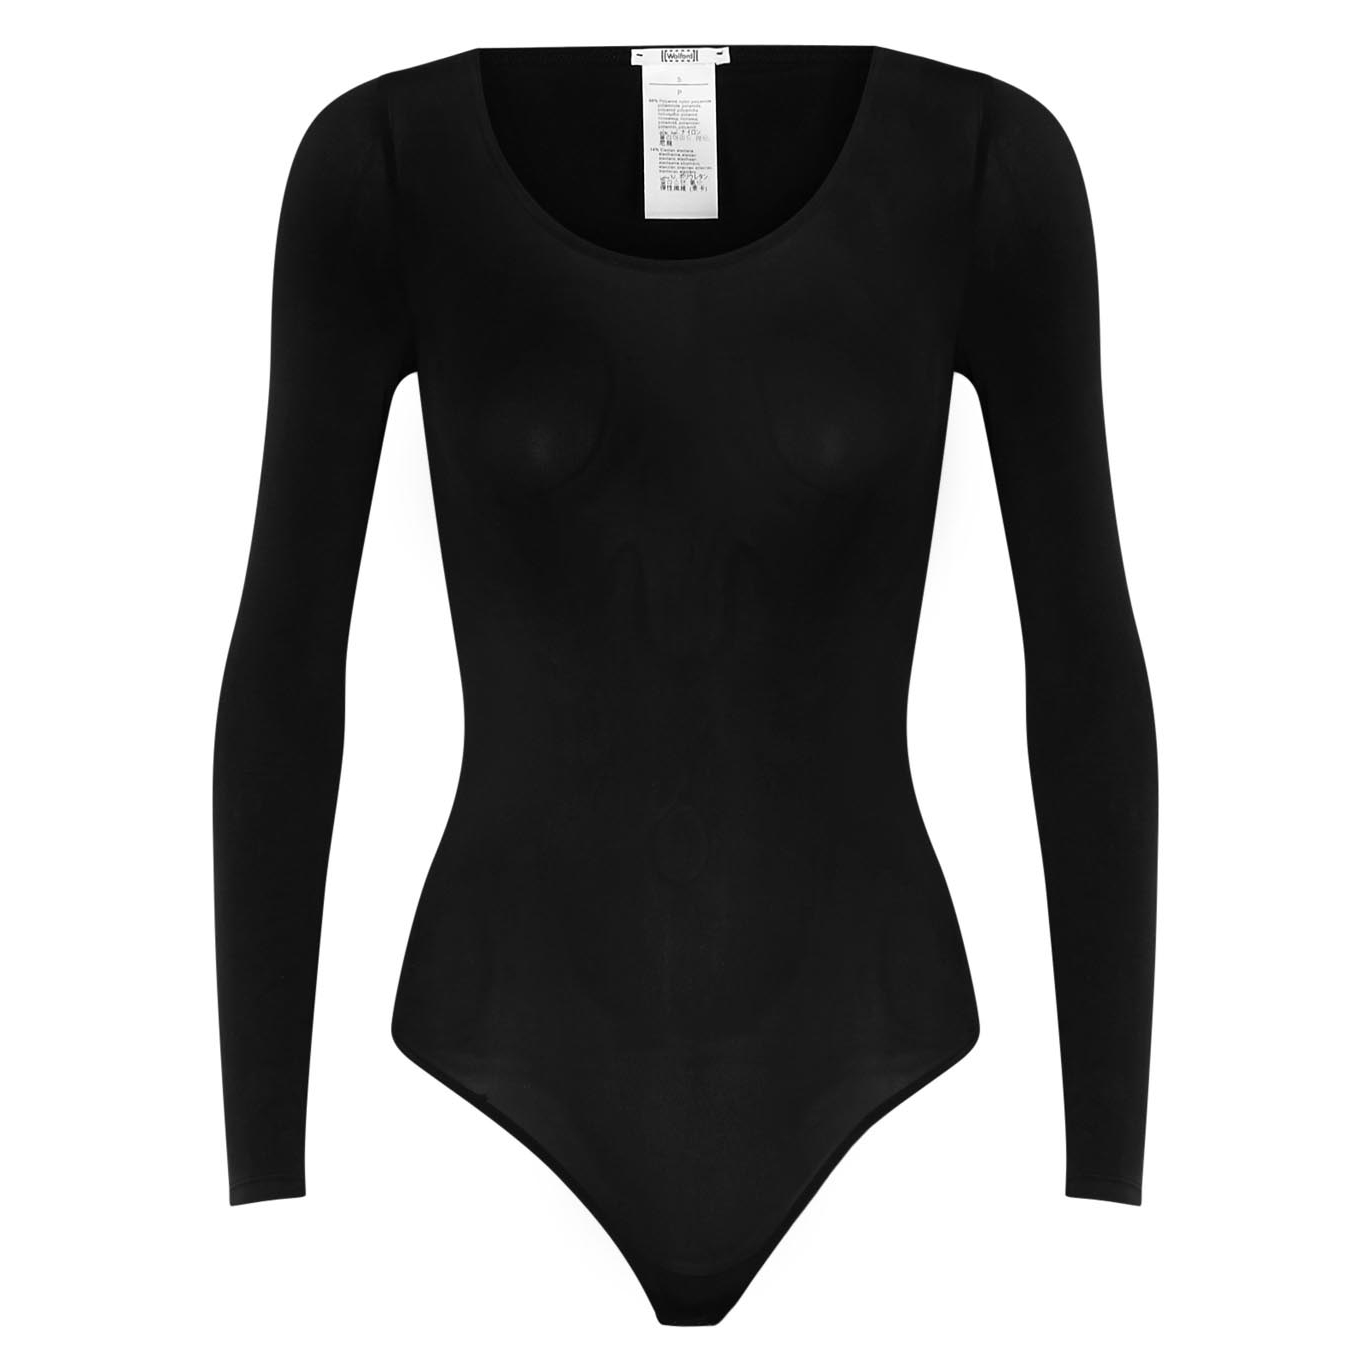 Wolford Buenos Aires Black Jersey Bodysuit - S